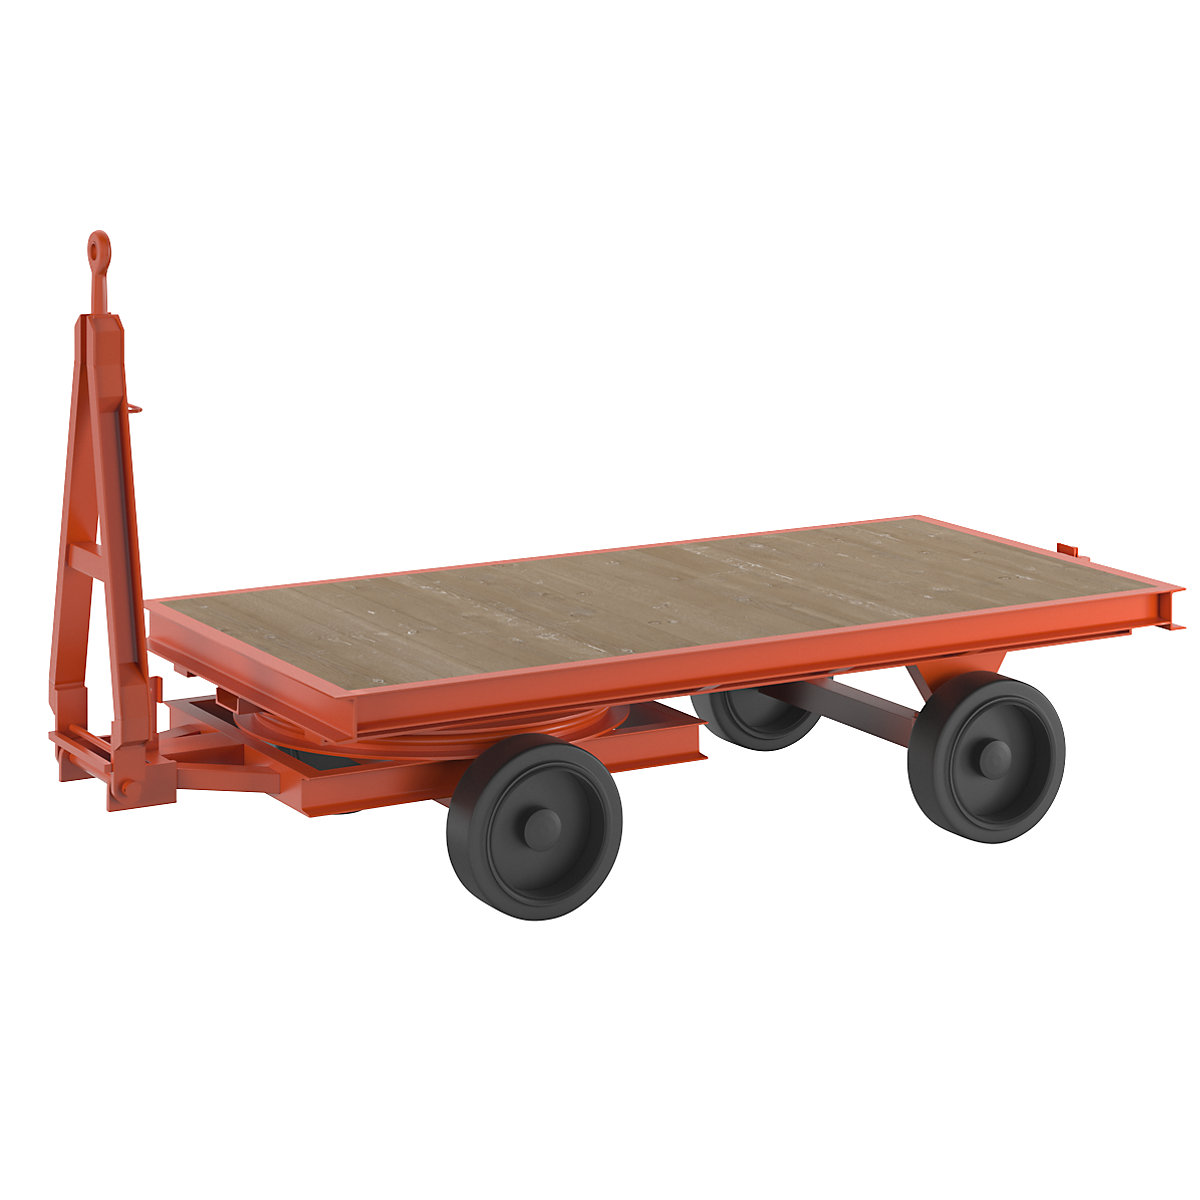 Trailer, 4-wheel double turntable steering, max. load 8 t, platform 2.5 x 1.25 m, solid rubber tyres-2